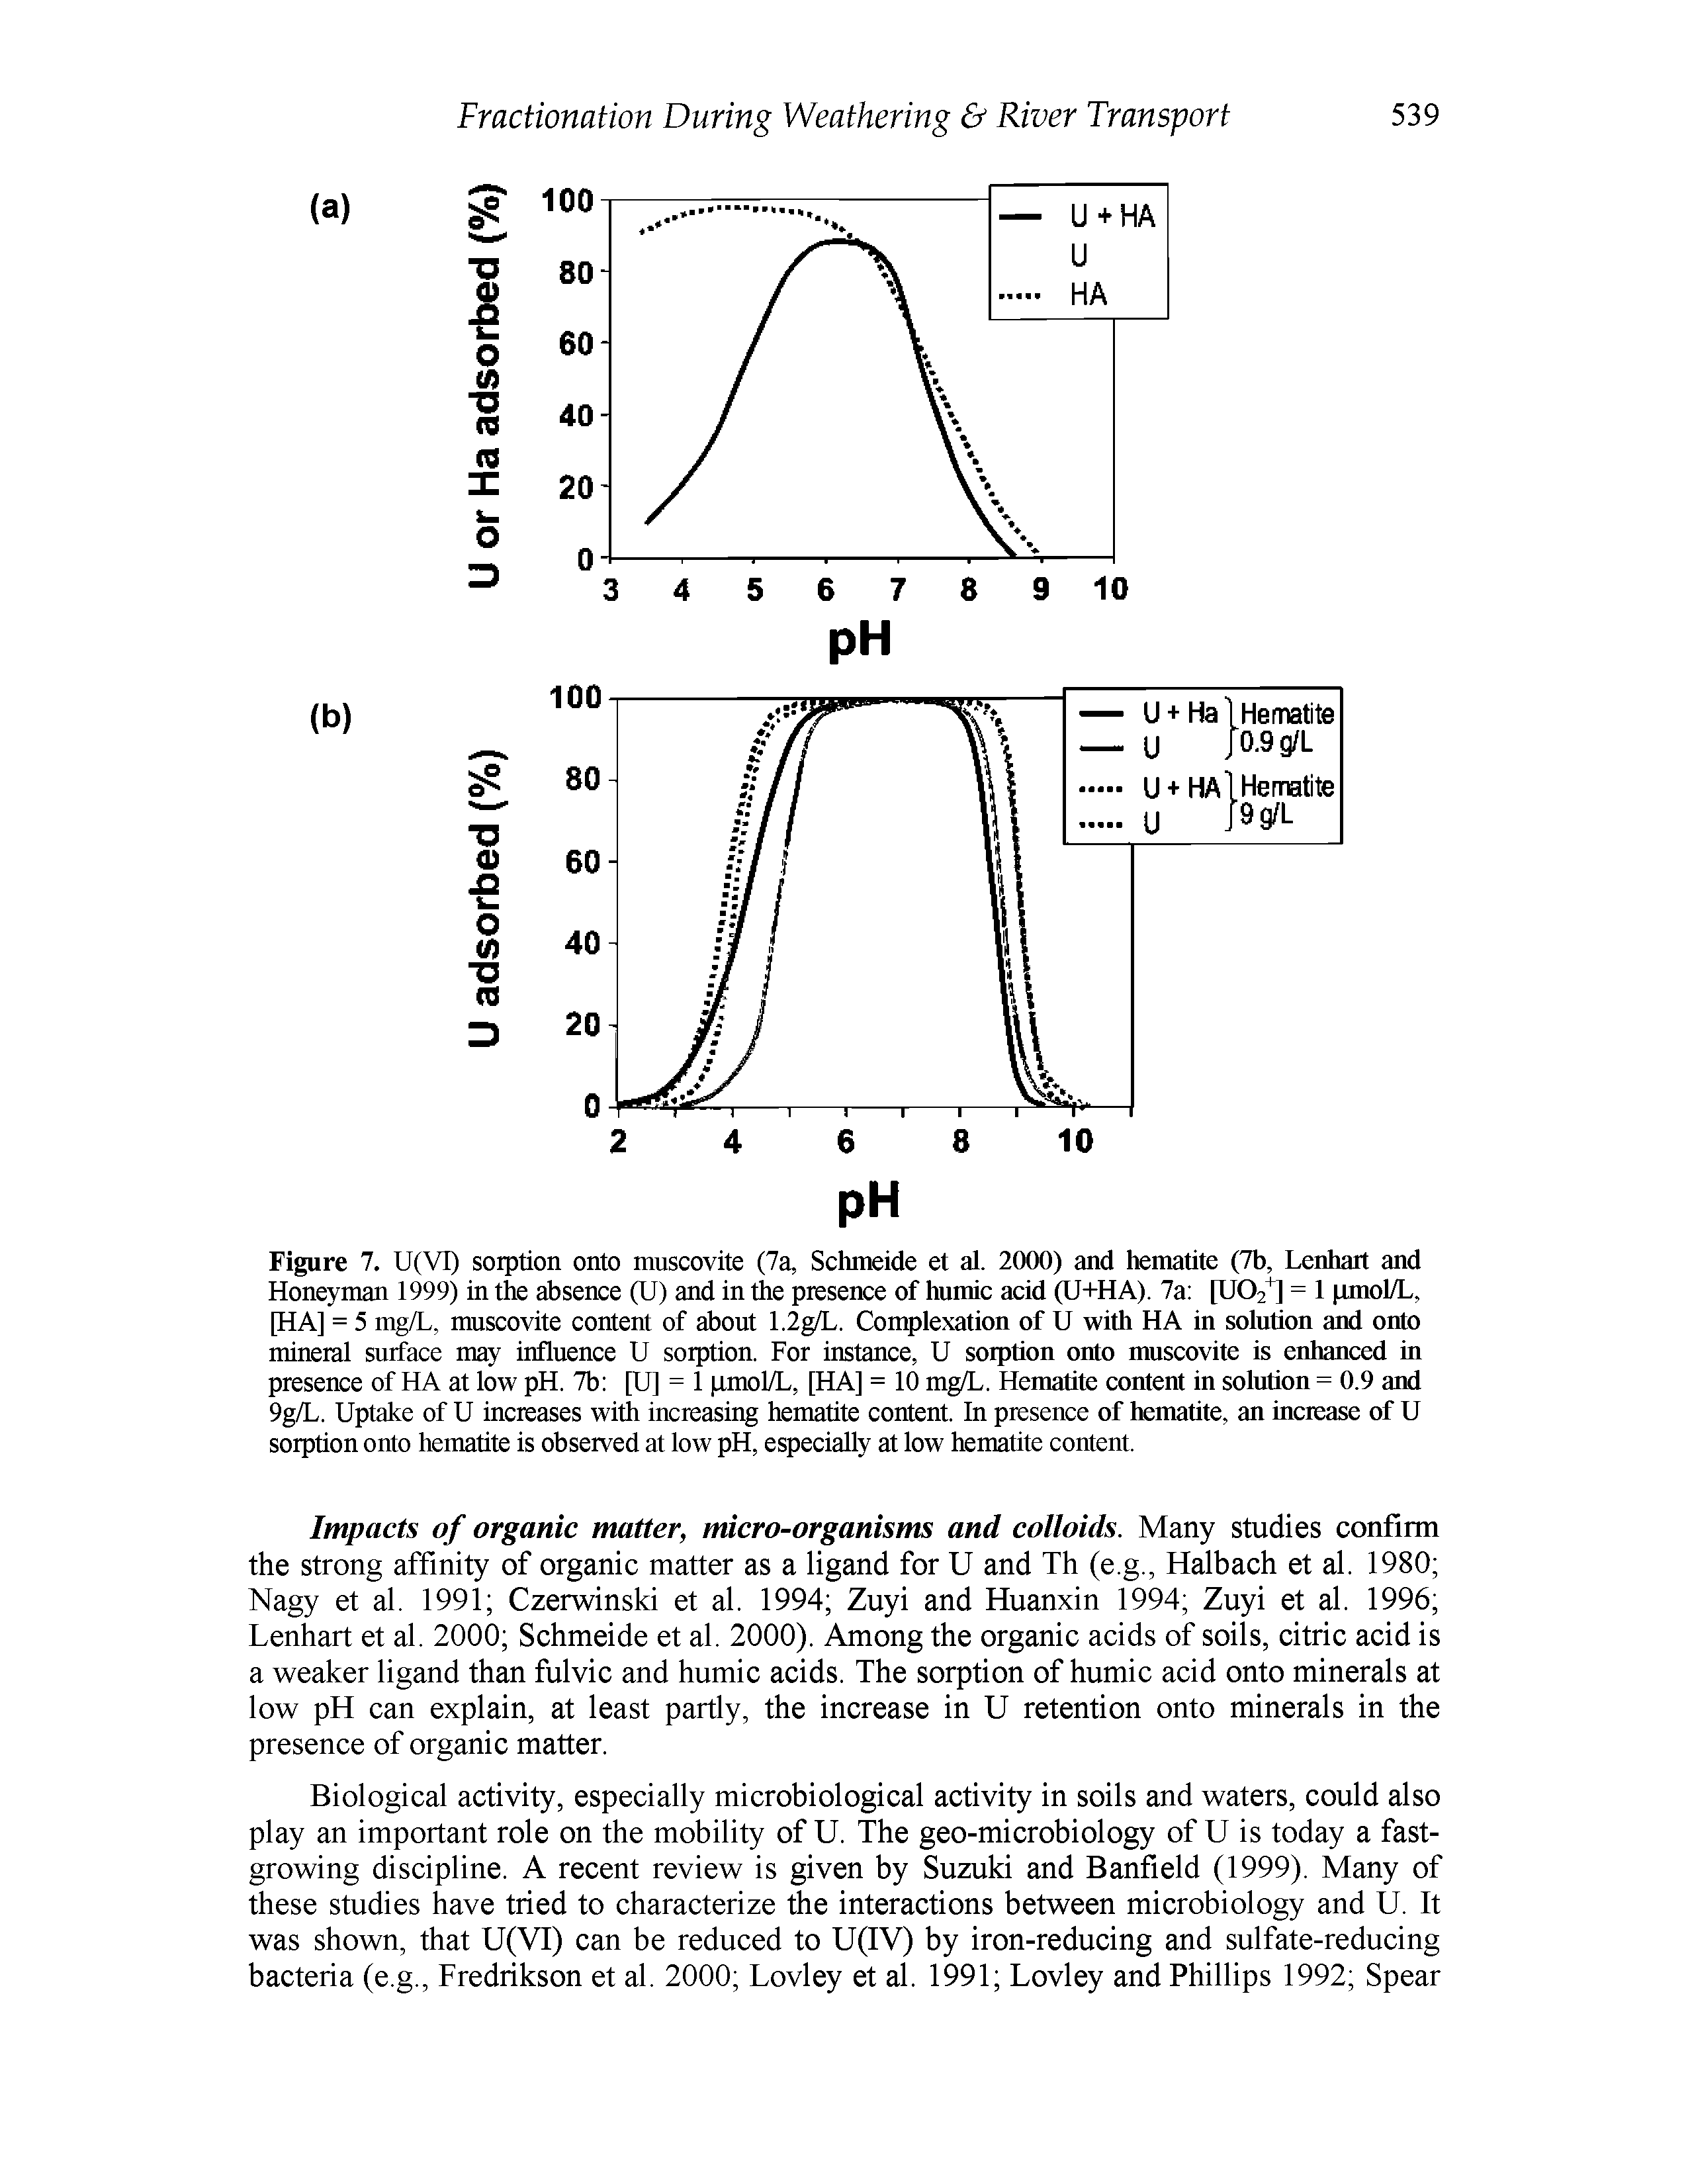 Figure 7. U(VI) sorption onto muscovite (7a, Schmeide et al. 2000) and hematite (7b, Lenhart and Honeyman 1999) in the absence (U) and in the presence of humic acid (U+HA). 7a [U02 ] = 1 pmol/L, [HA] = 5 mg/L, muscovite content of about 1.2g/L. Complexation of U with HA in solution and onto mineral surface may influence U sorption. For instance, U sorption onto muscovite is enhanced in presence of HA at low pH. 7b [U] = 1 jamol/L, [HA] = 10 mg/L. Hematite content in solution = 0.9 and 9g/L. Uptake of U increases with increasing hematite content. In presence of hematite, an increase of U sorption onto hematite is observed at low pH, especially at low hematite content.